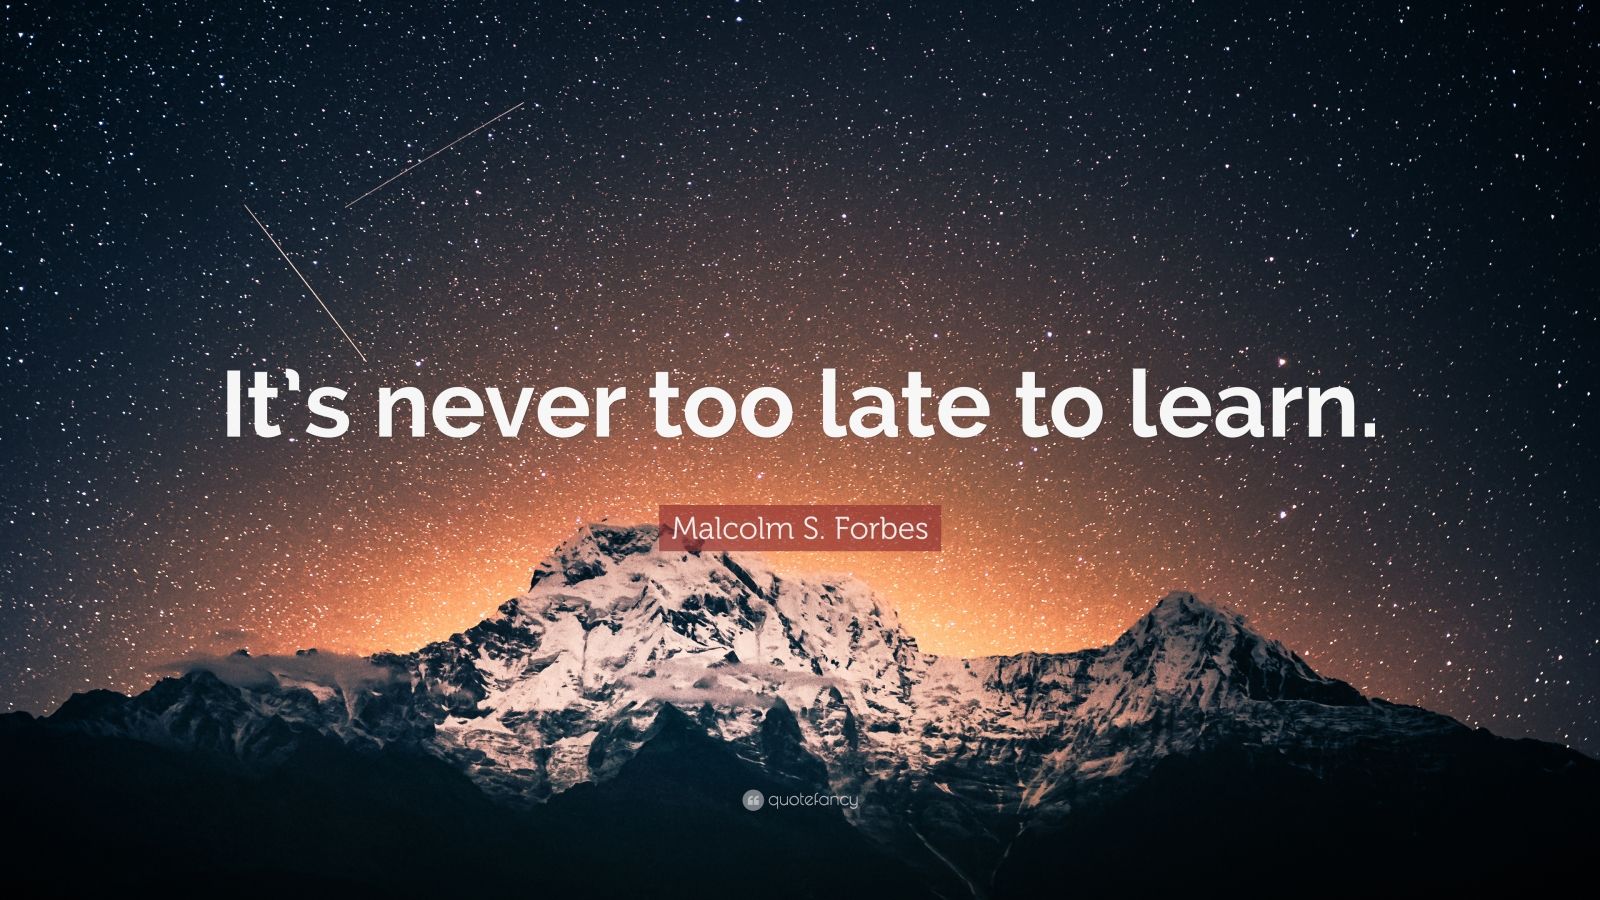 Malcolm S. Forbes Quote: “It’s never too late to learn.” (9 wallpapers